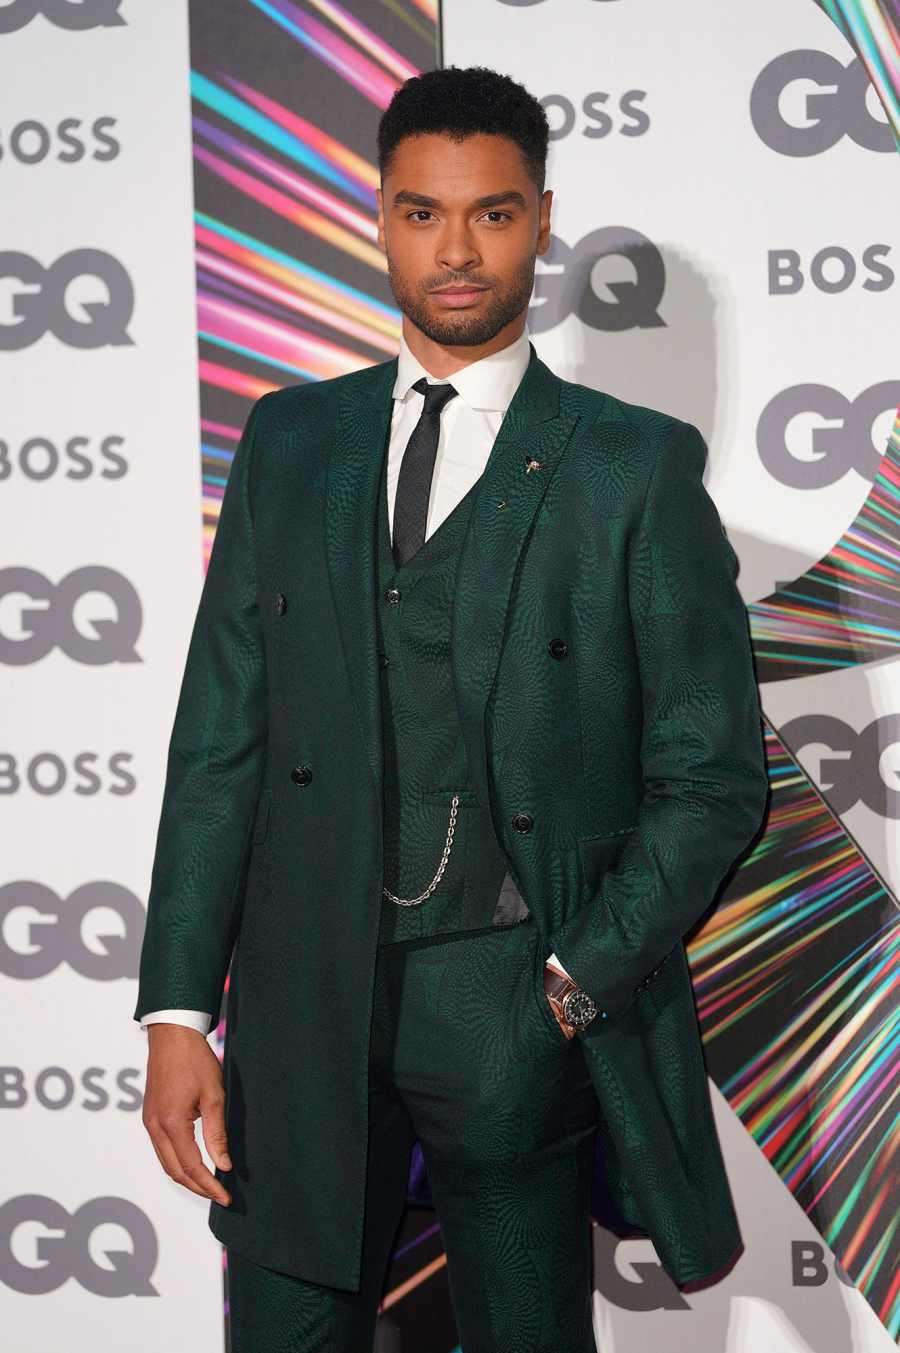 See the Best Dressed Stars, Hottest Hunks at the 2021 GQ Men of the Year Awards: Photos